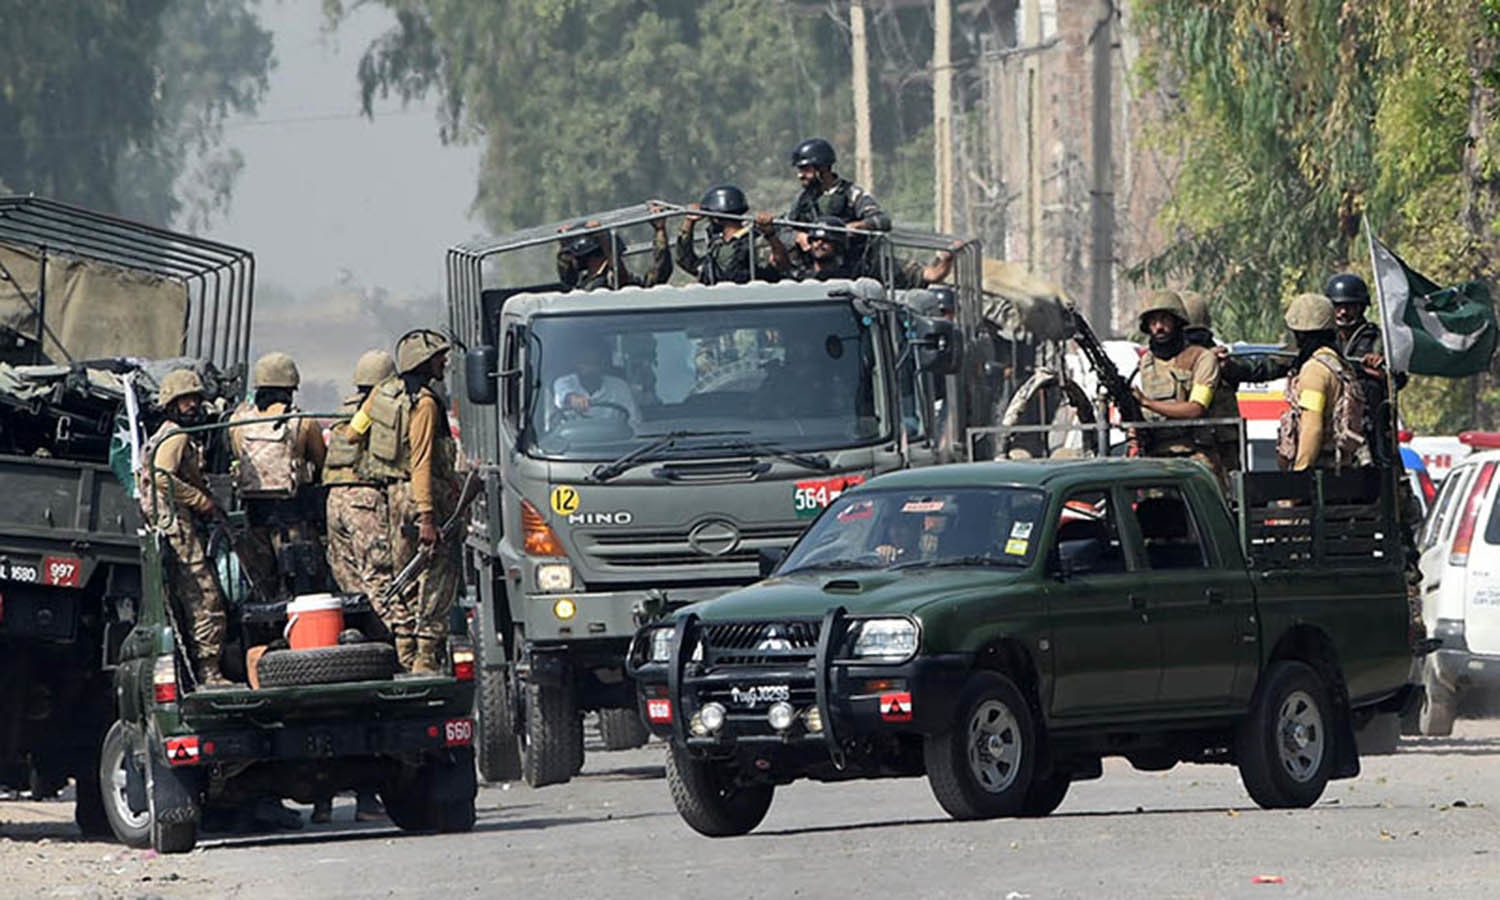 three-terrorists-killed-in-paf-training-airbase-mianwali-attack